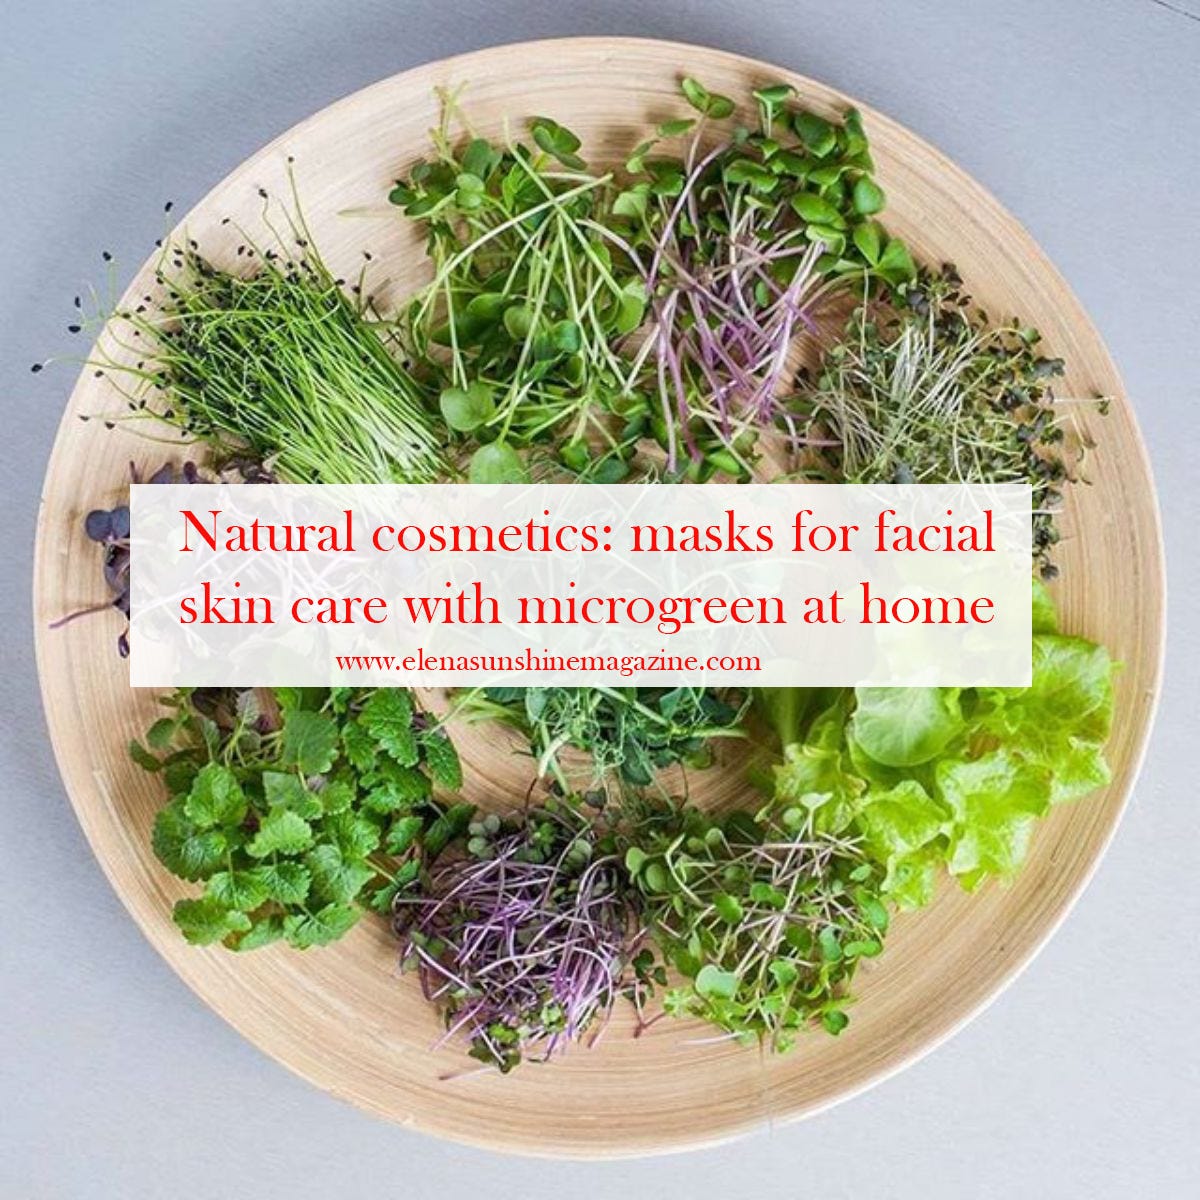 Natural cosmetics masks for facial skin care with microgreen at home by Elena image